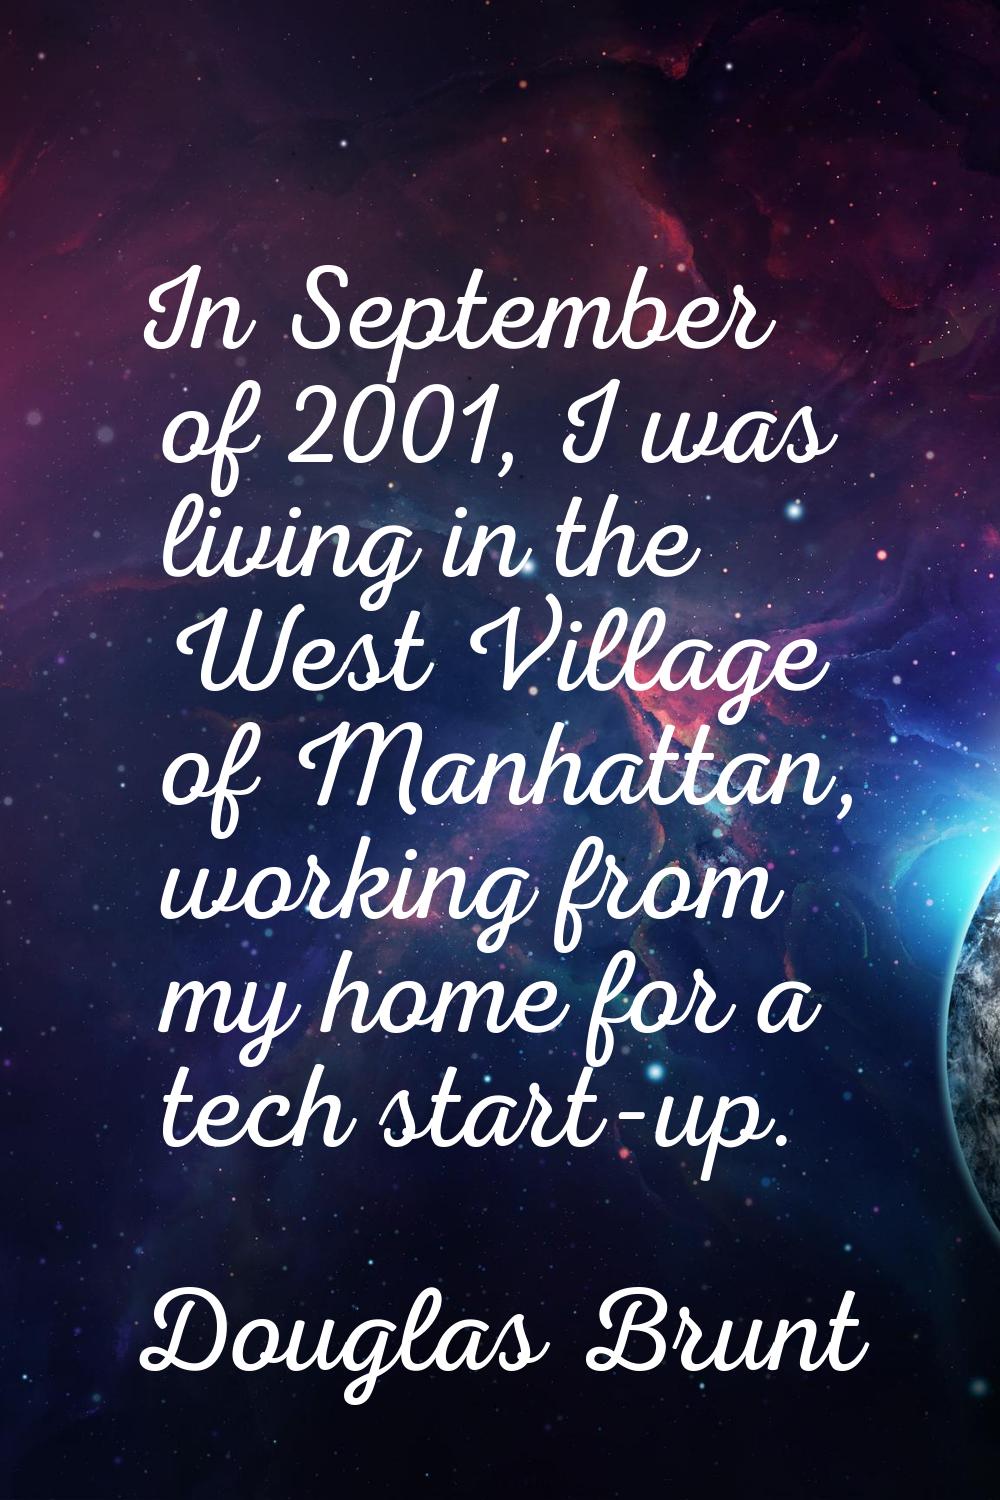 In September of 2001, I was living in the West Village of Manhattan, working from my home for a tec